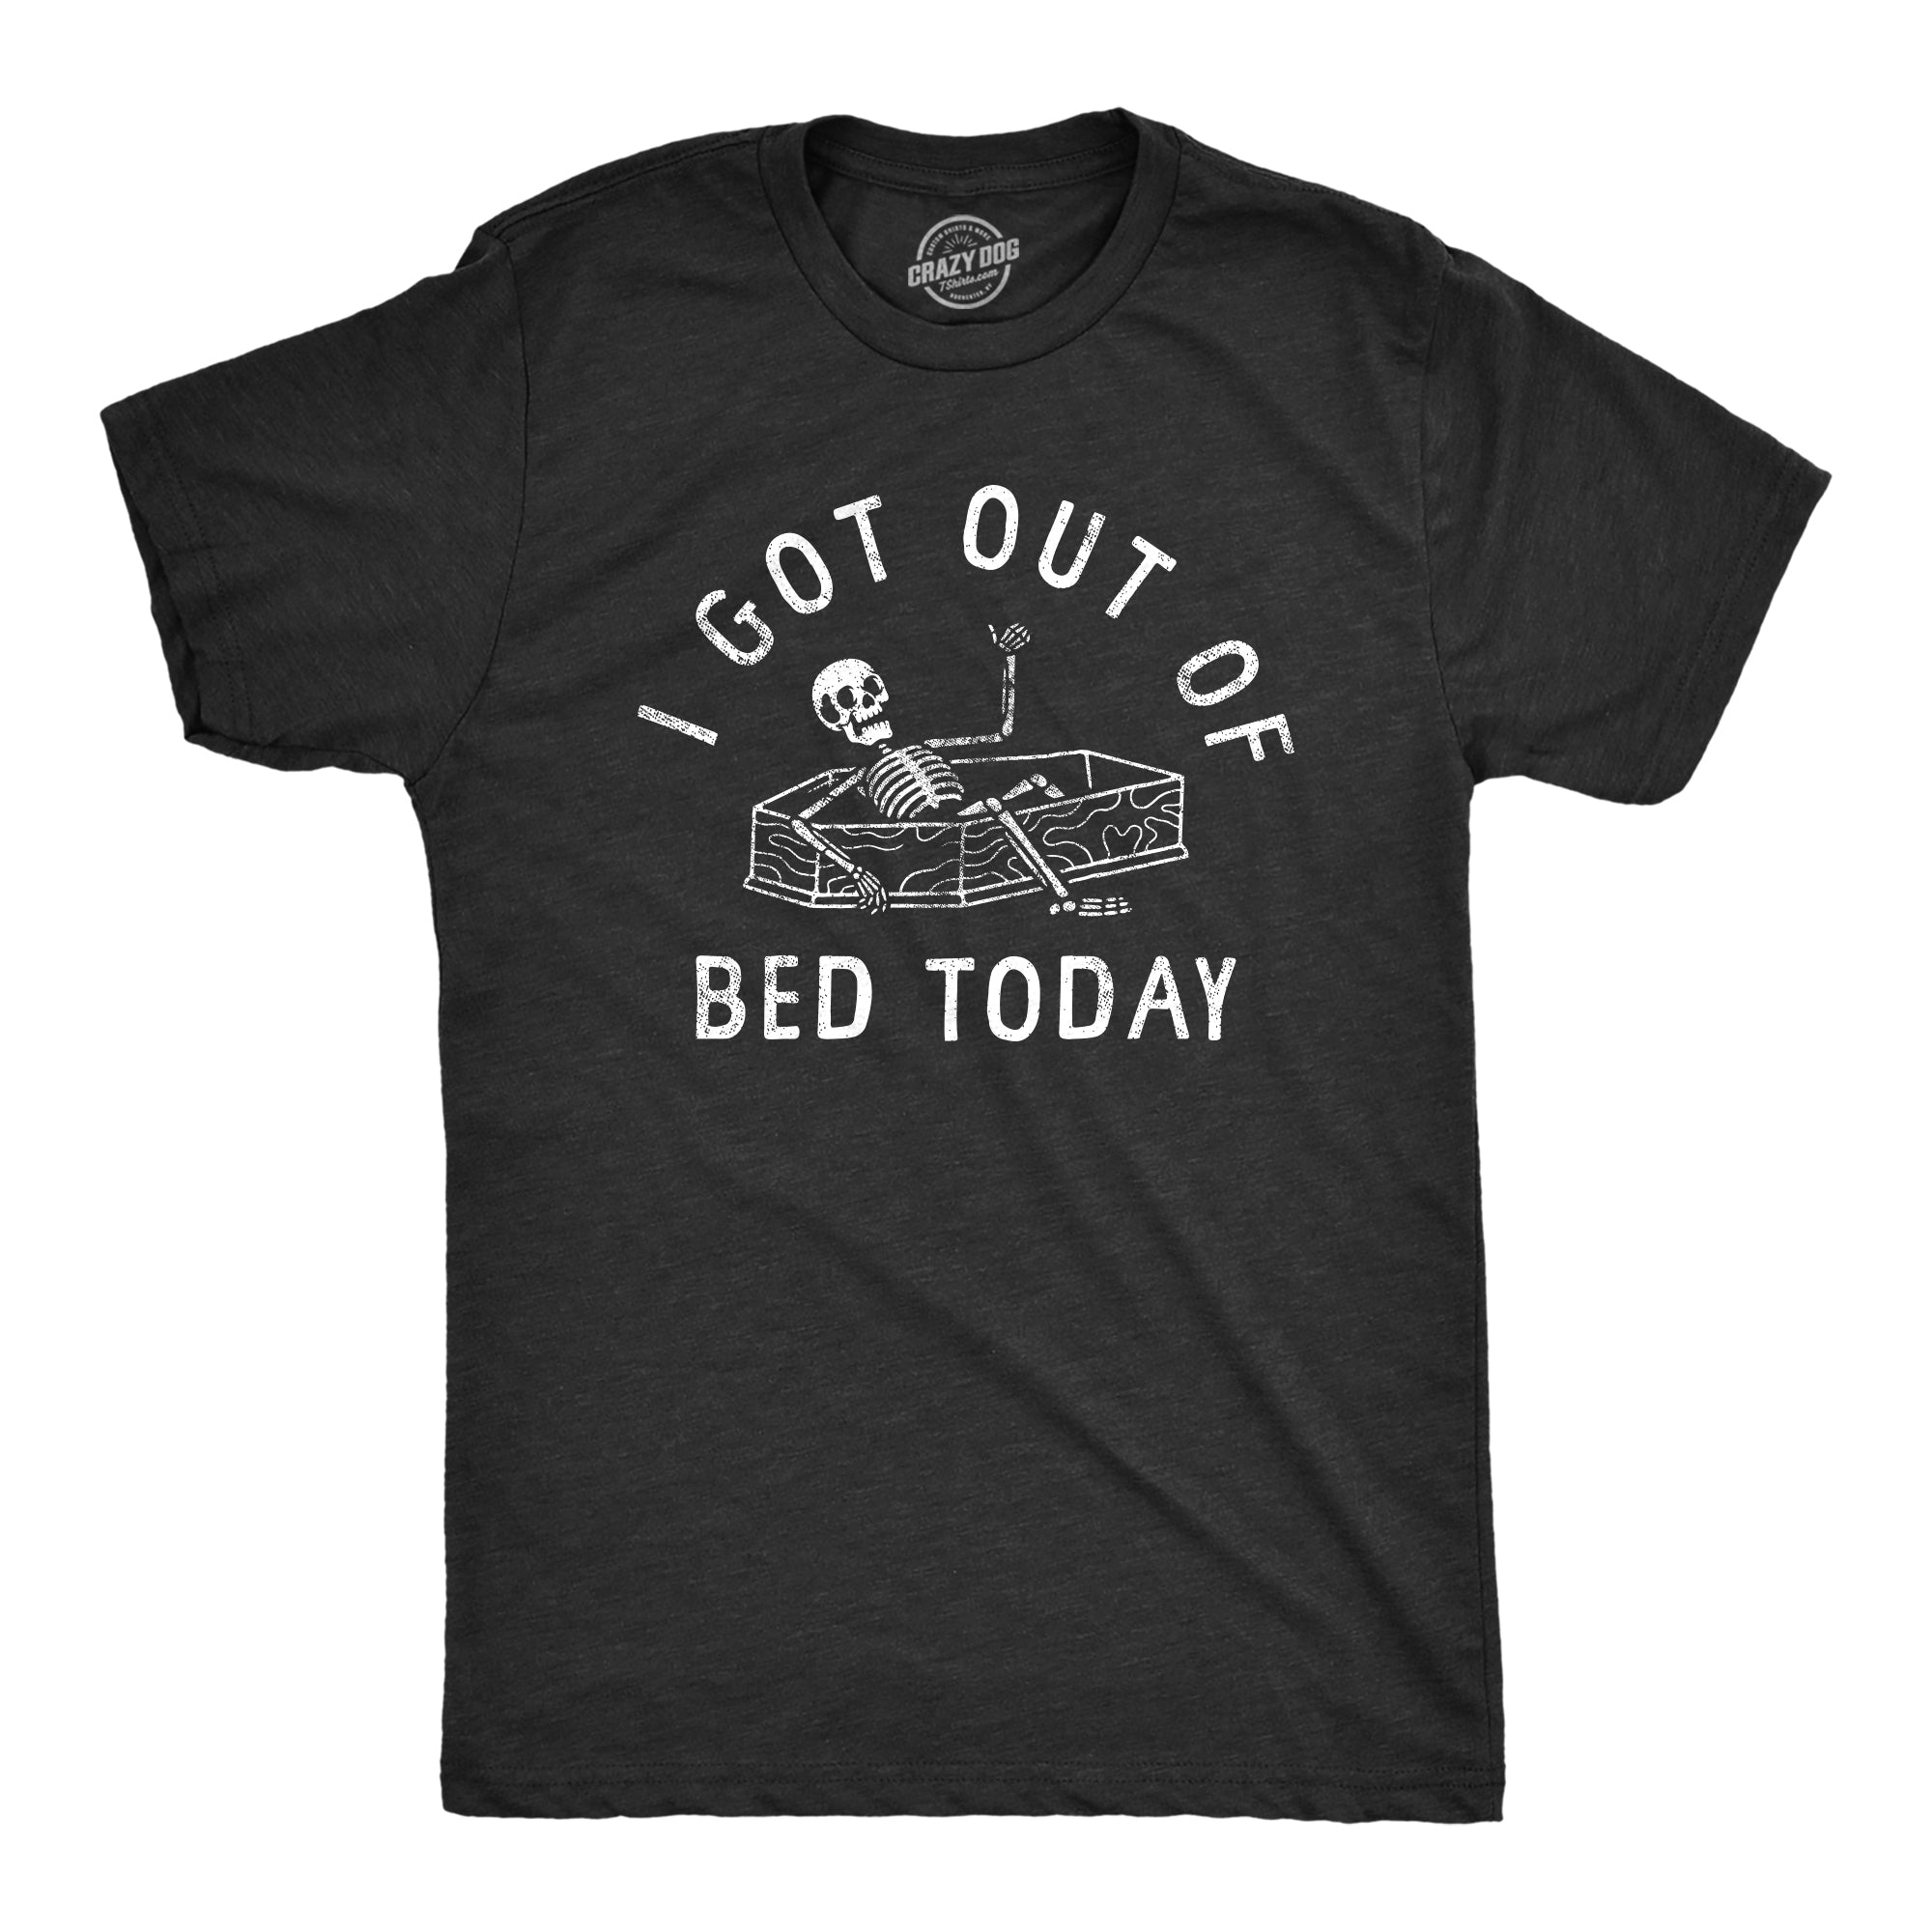 Funny Heather Black - BED I Got Out Of Bed Today Mens T Shirt Nerdy Sarcastic Tee